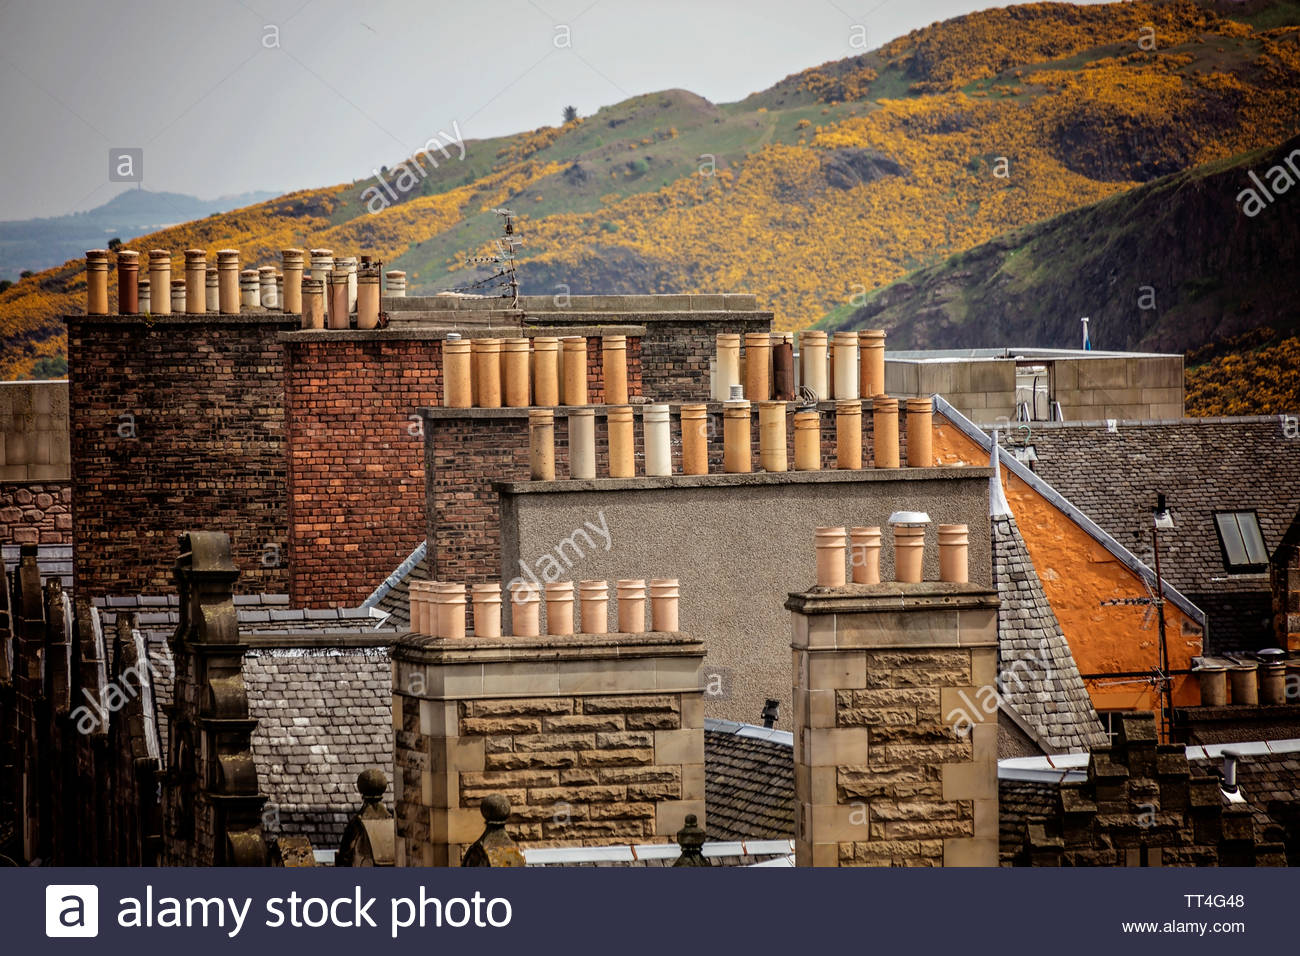 Chimney Pots And Stacks On Roofs With Salisbury Crags In